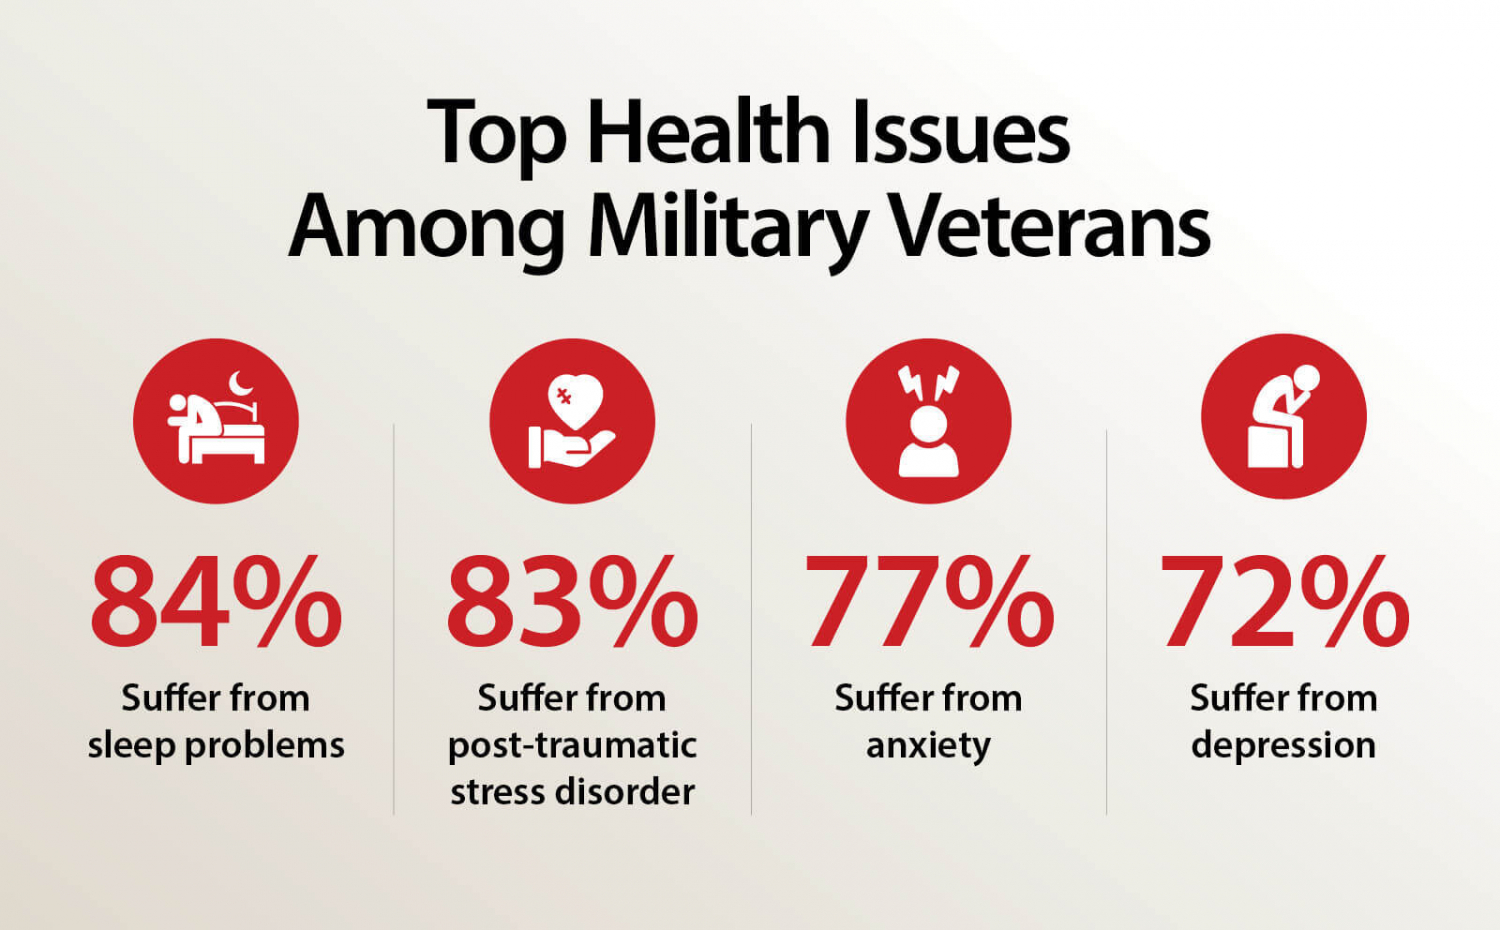 Statistics on top health issues among military veterans.